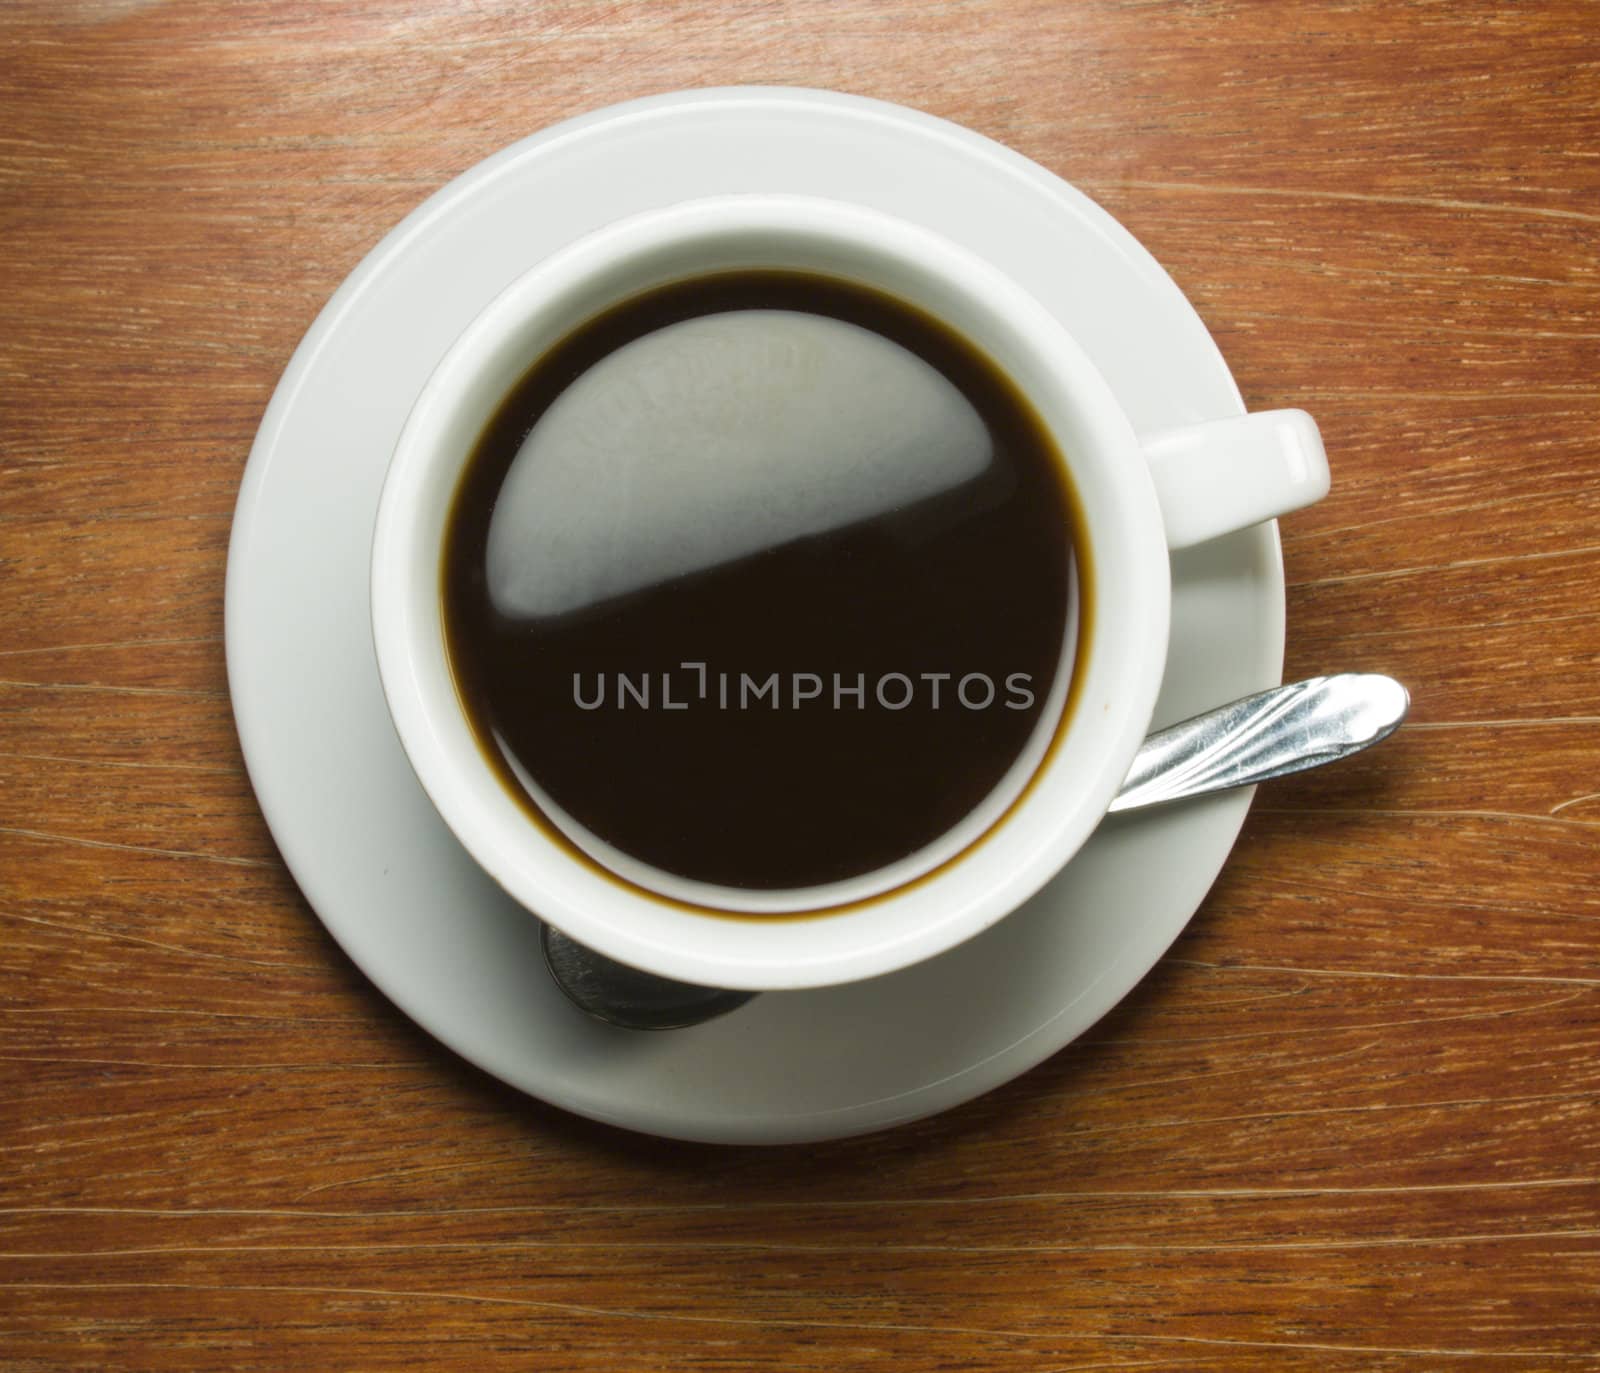 Coffeecup with Coffee in it on a wooden table by smoki